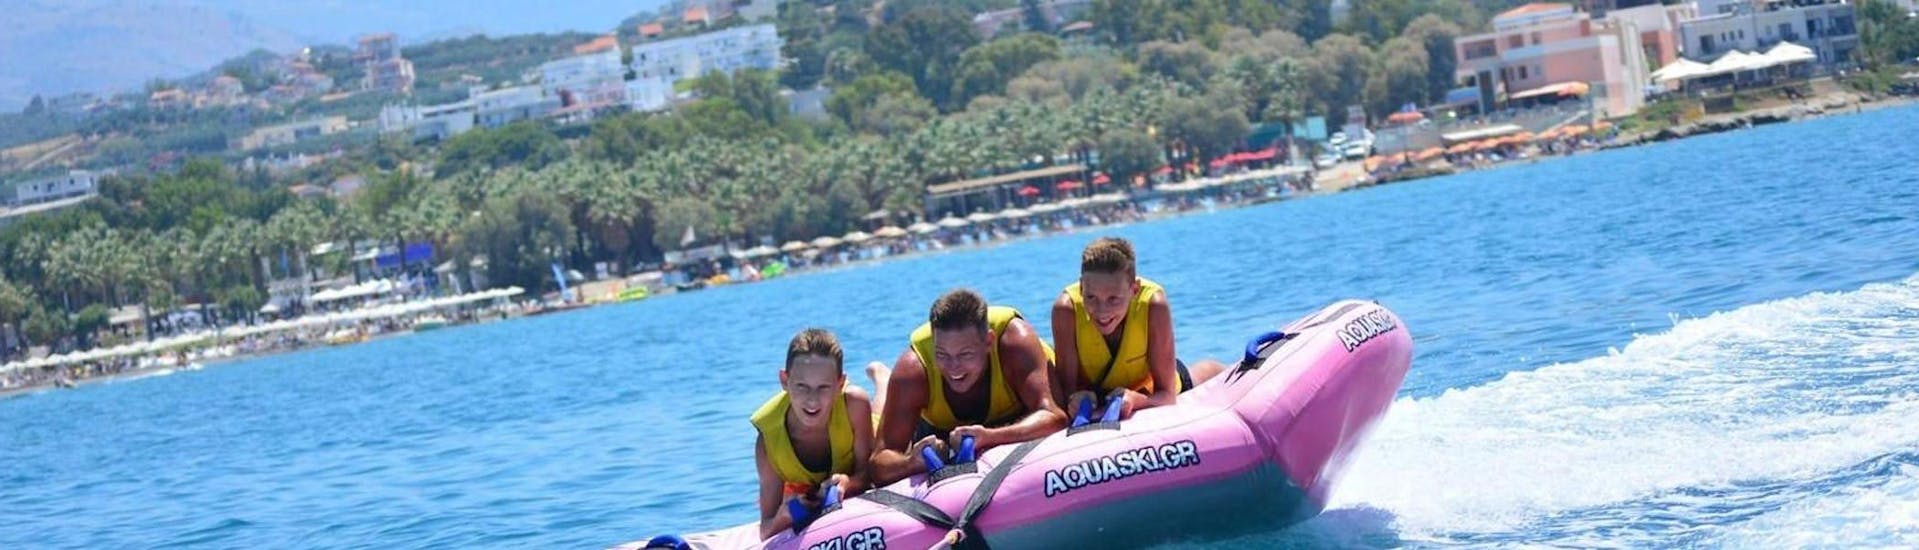 A family is having fun during the Airstream Ride in Agia Marina activity with Cactus Water Sports Center.